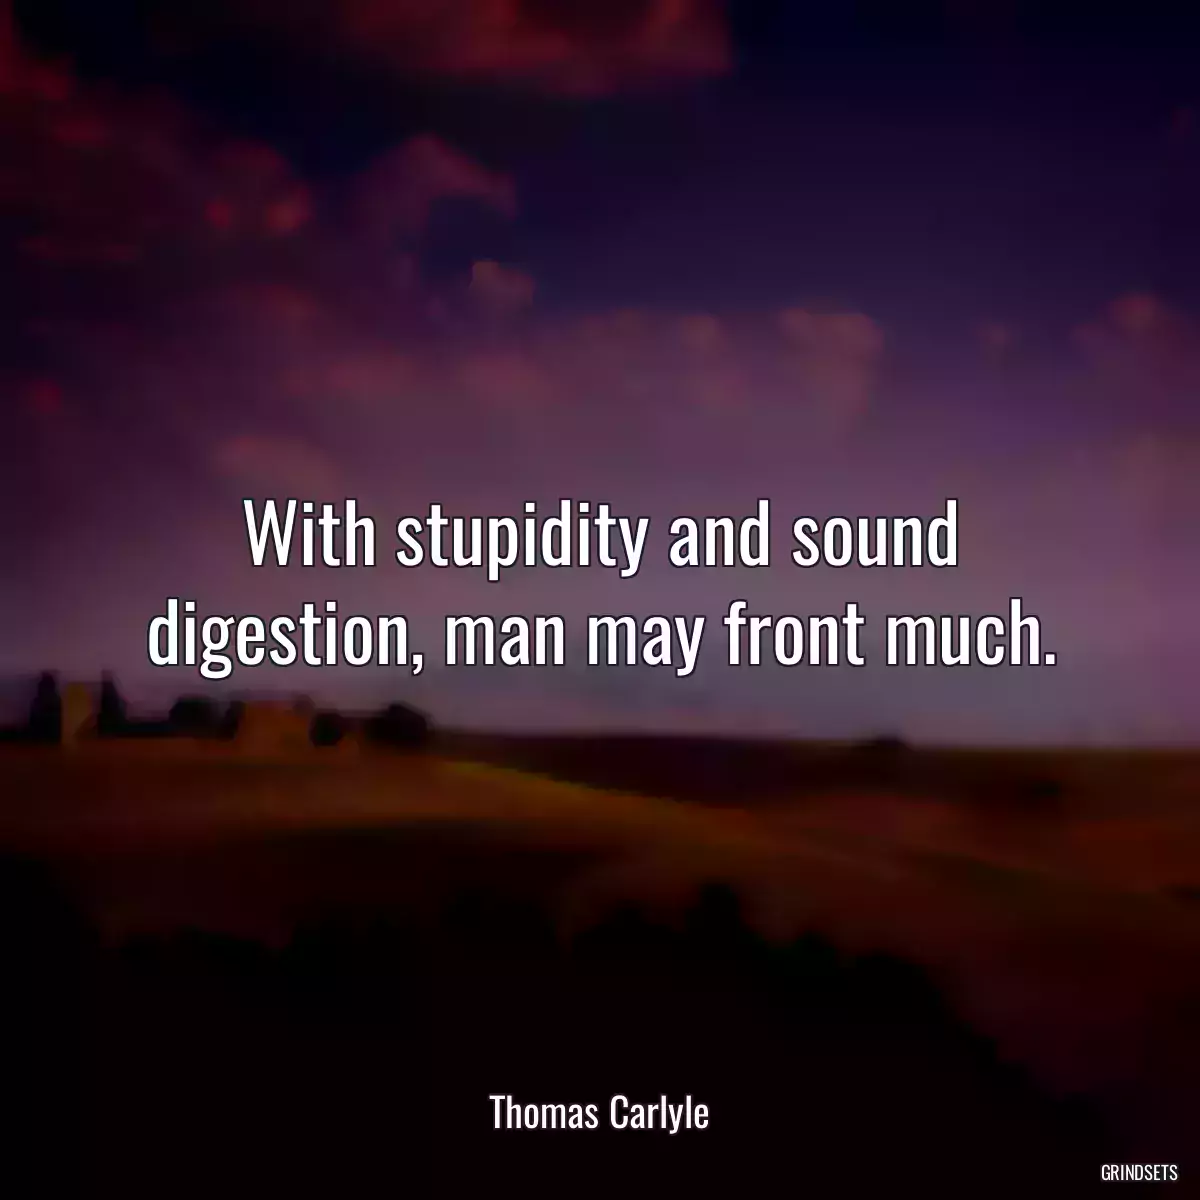 With stupidity and sound digestion, man may front much.